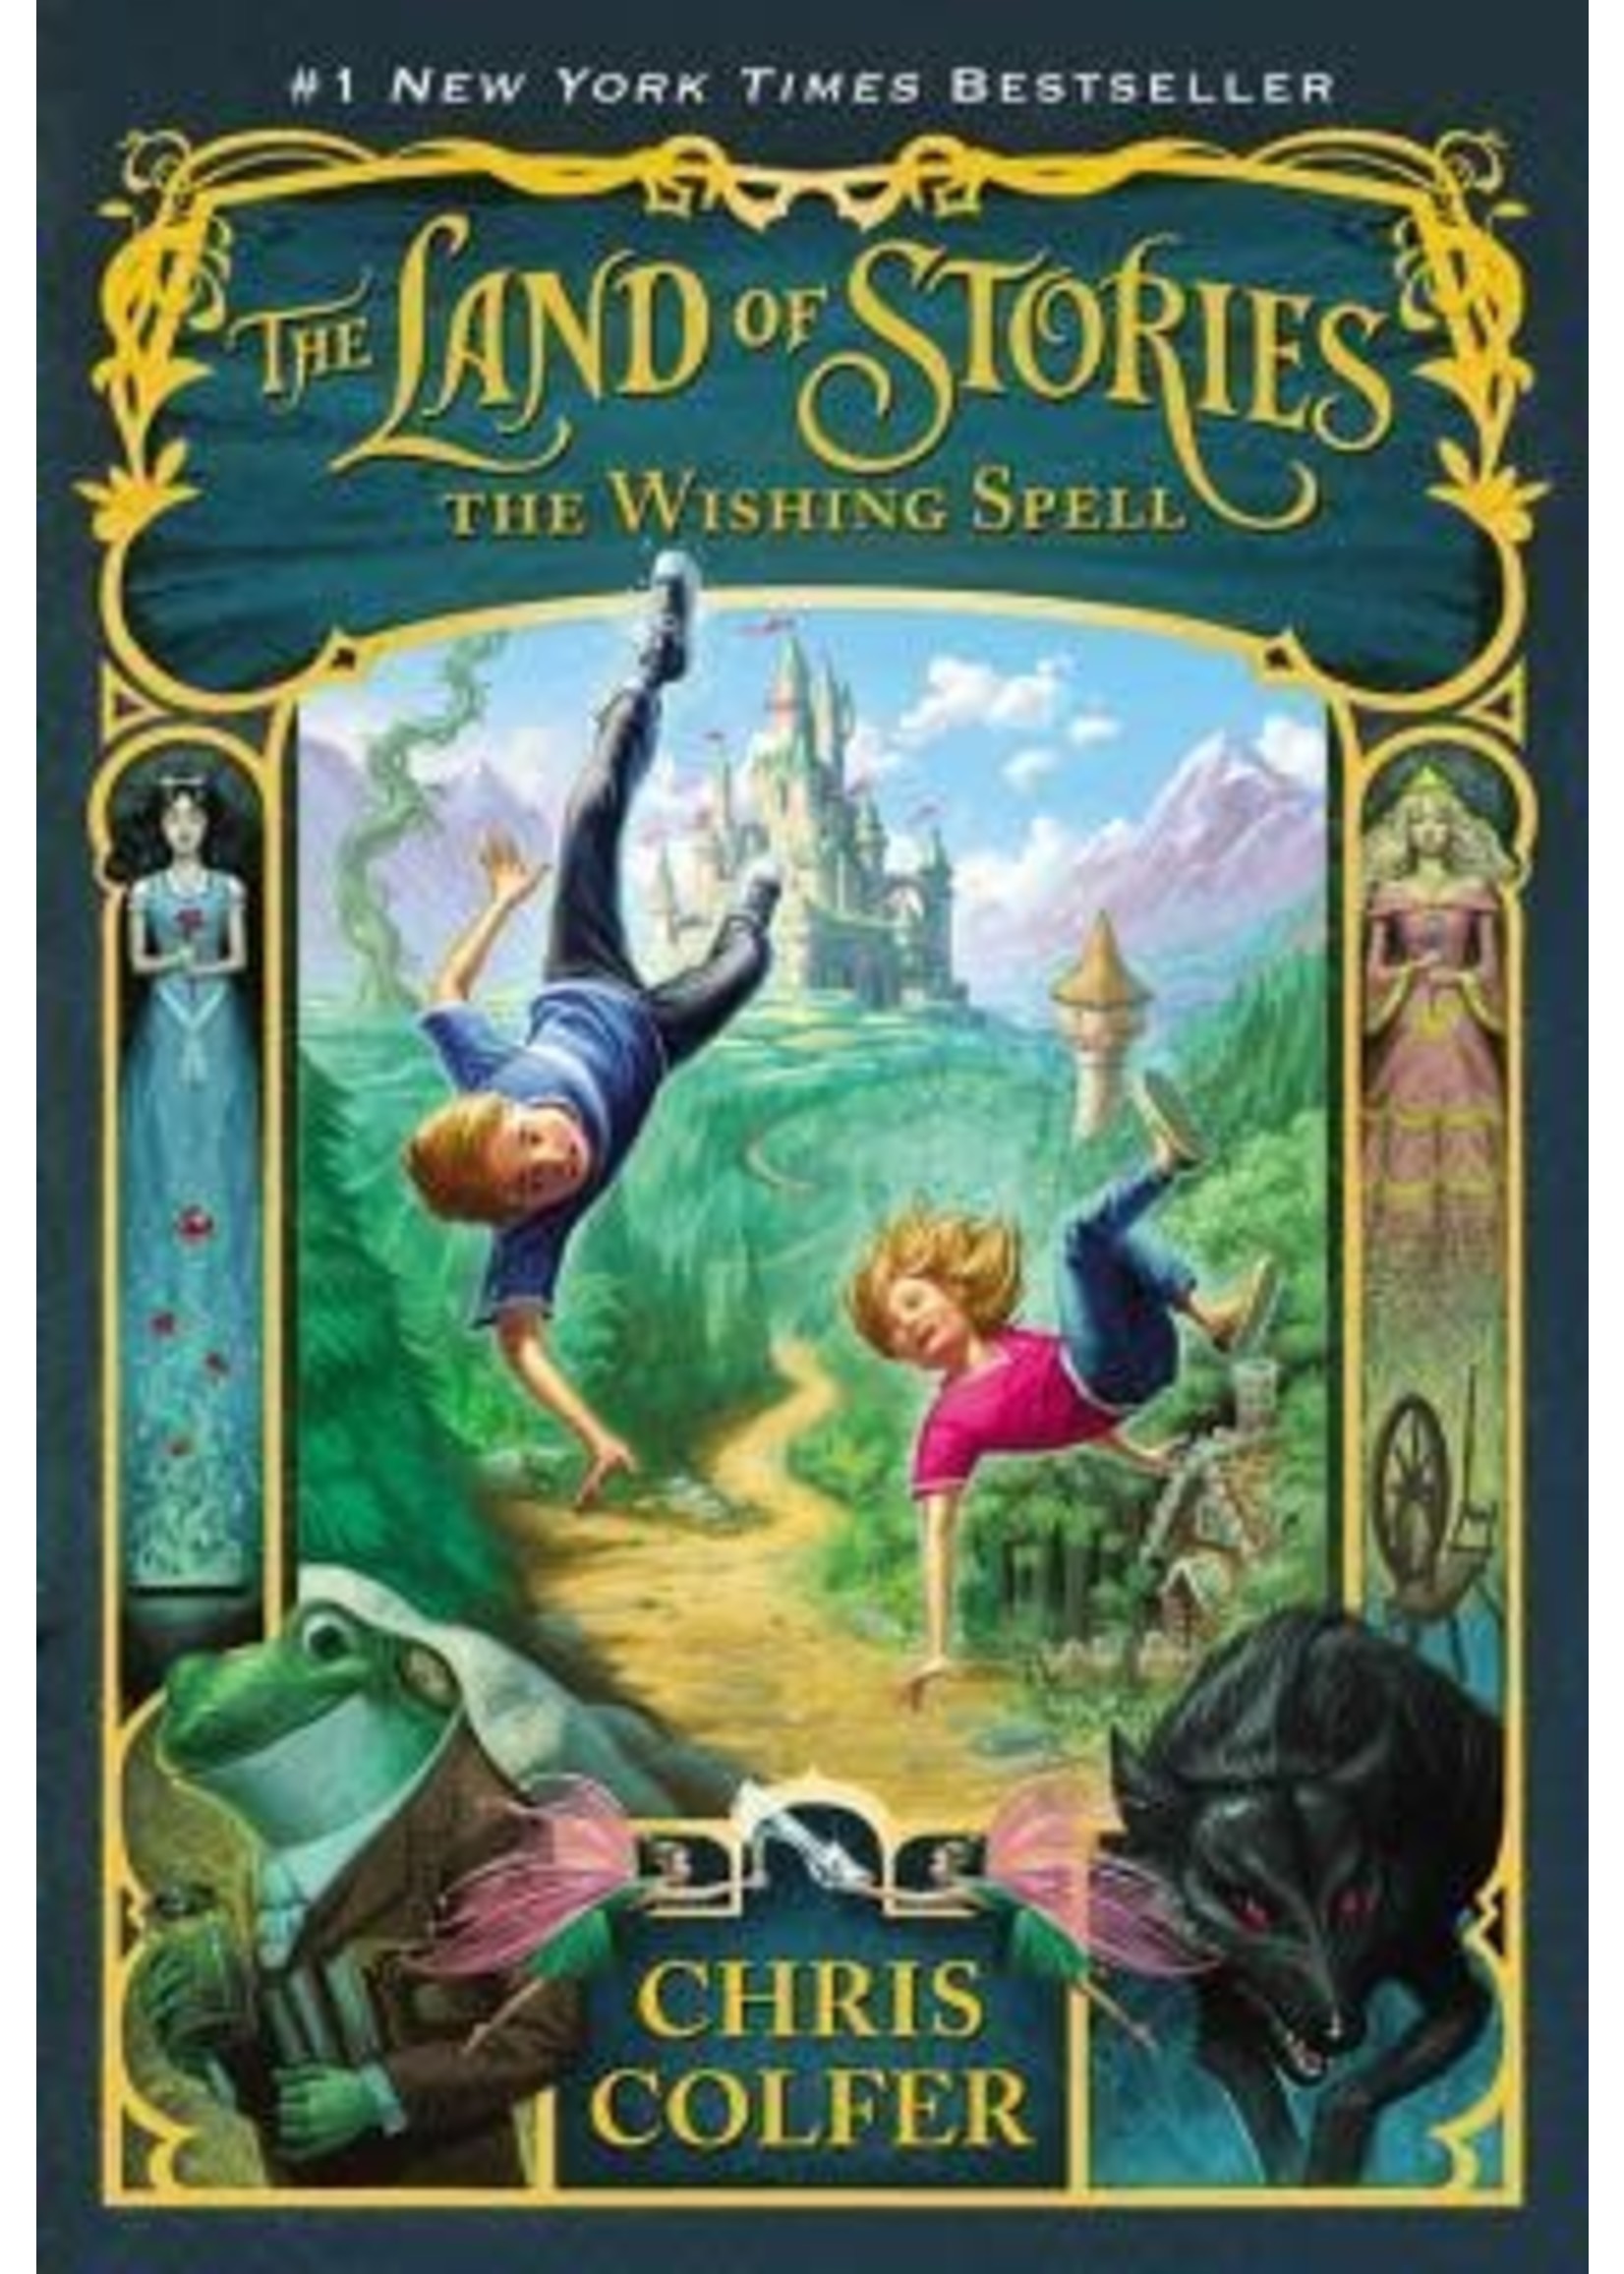 The Wishing Spell (The Land of Stories #1) by Chris Colfer